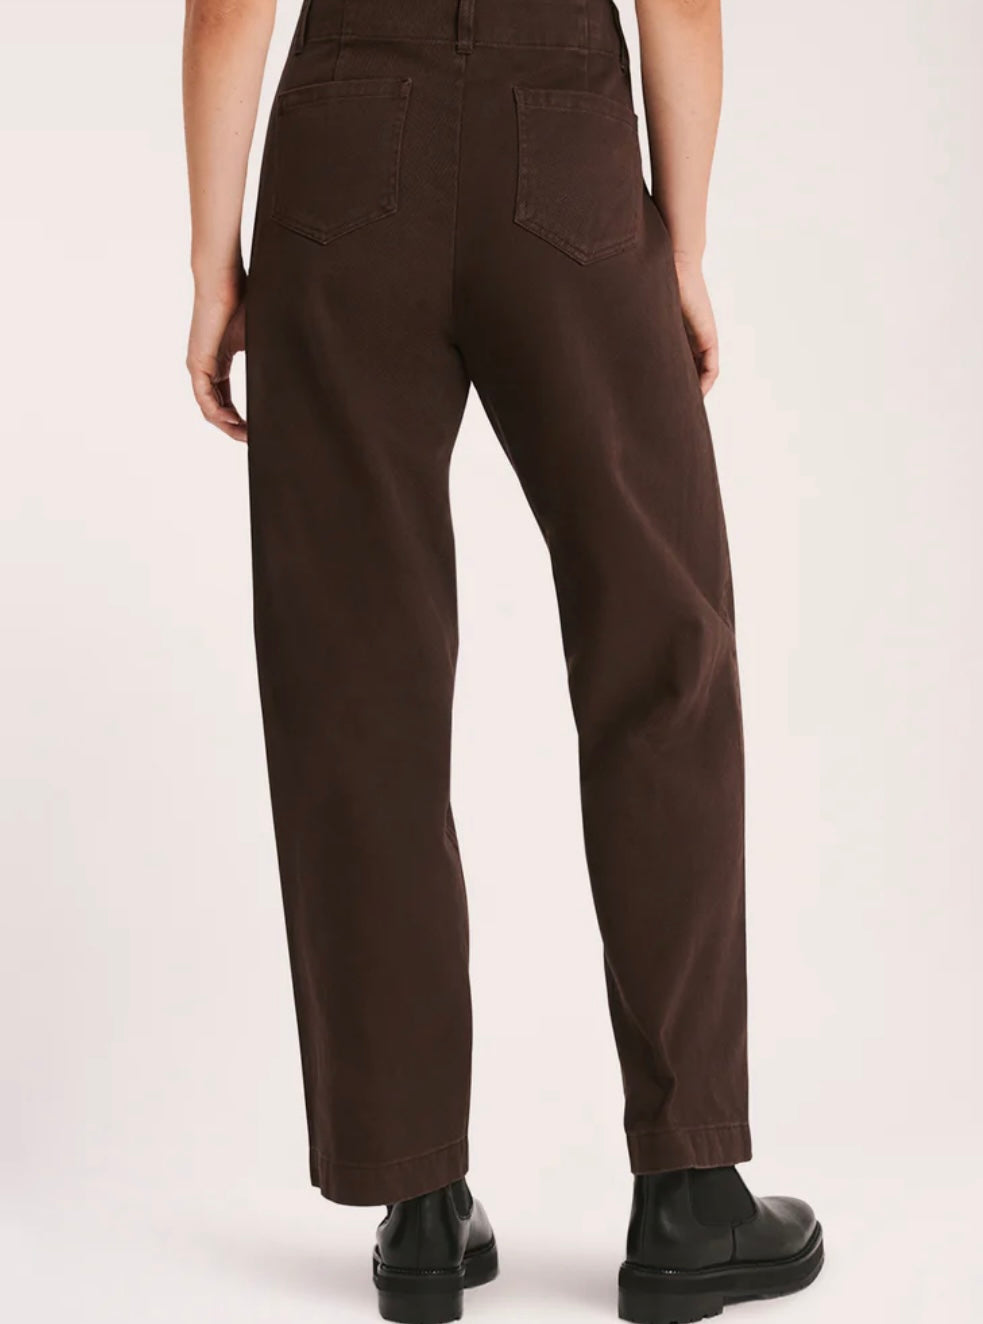 Nude Lucy - Neptune Pant - Cinder